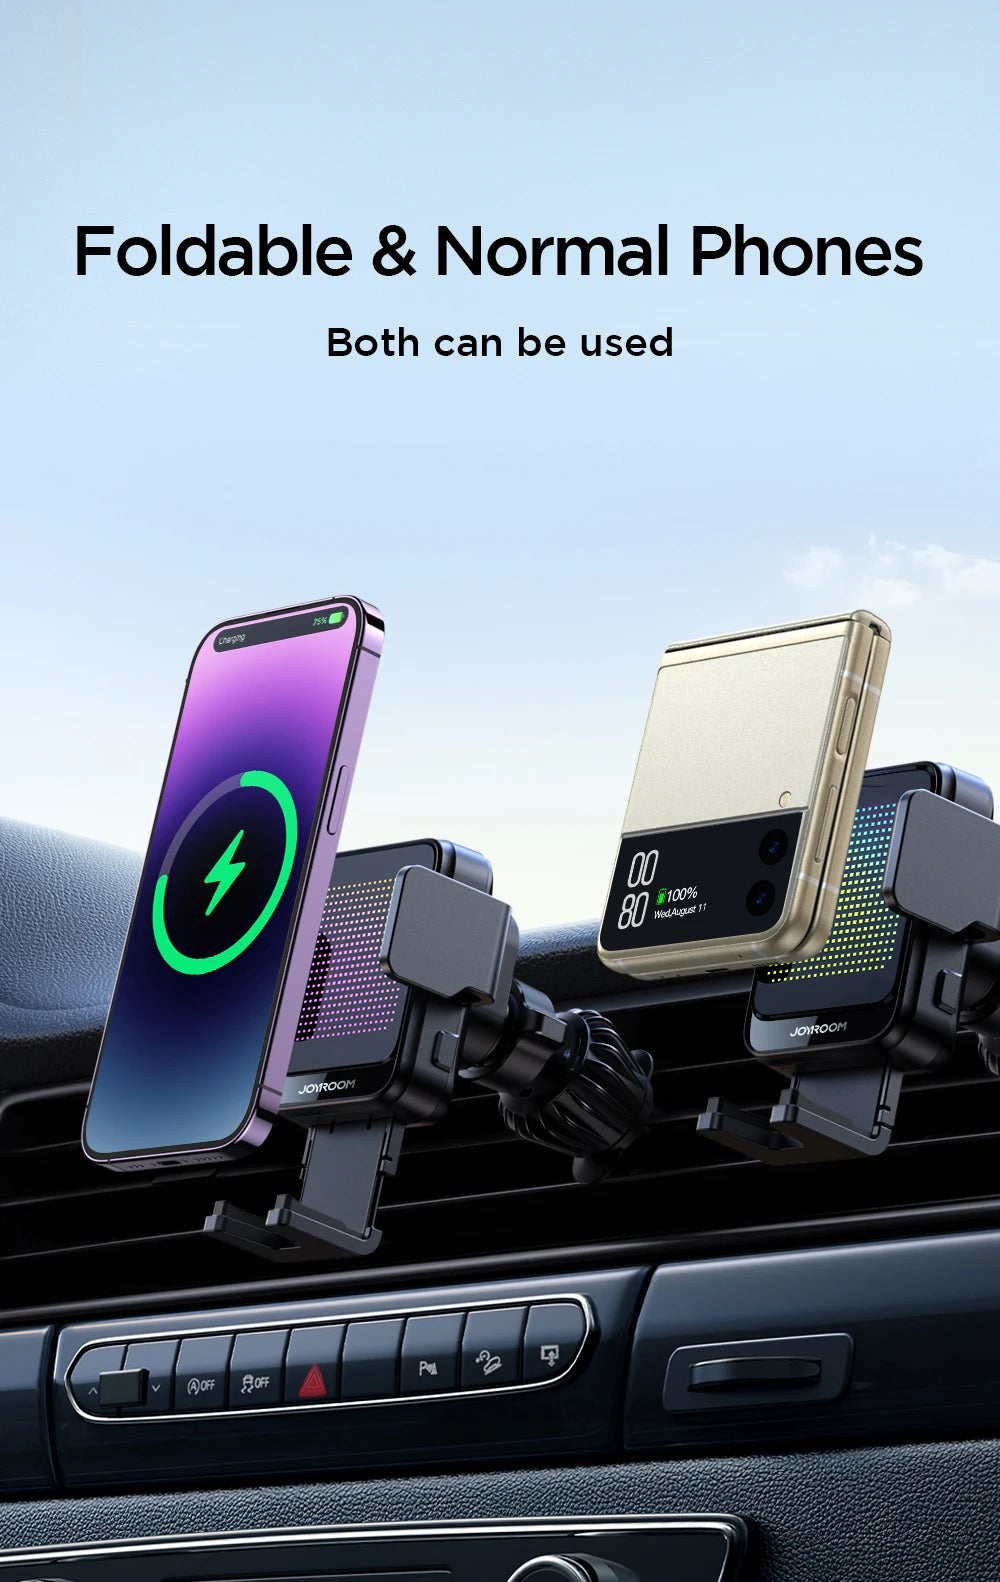 Joyroom 15W Wireless Charging Car Phone Holder Automatic Fast Charger For iPhone 14 13 12 Pro Max Samsung Z Flip Phone Holder